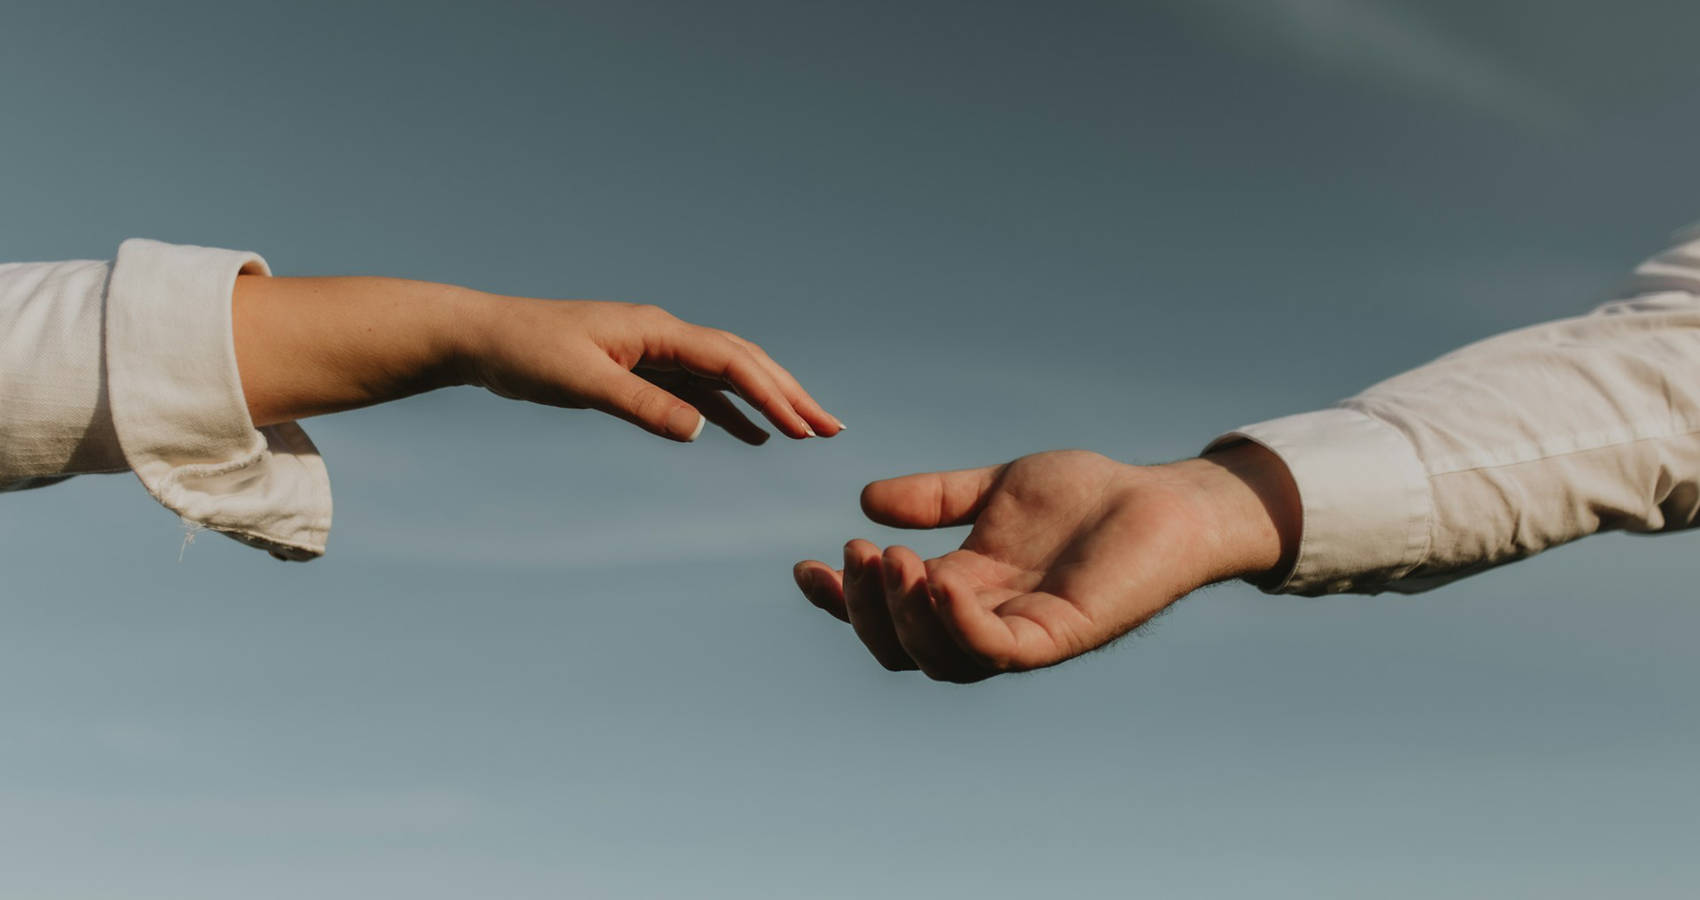 A Helping Hand, poetry by Abhishek Punyani at Spillwords.com